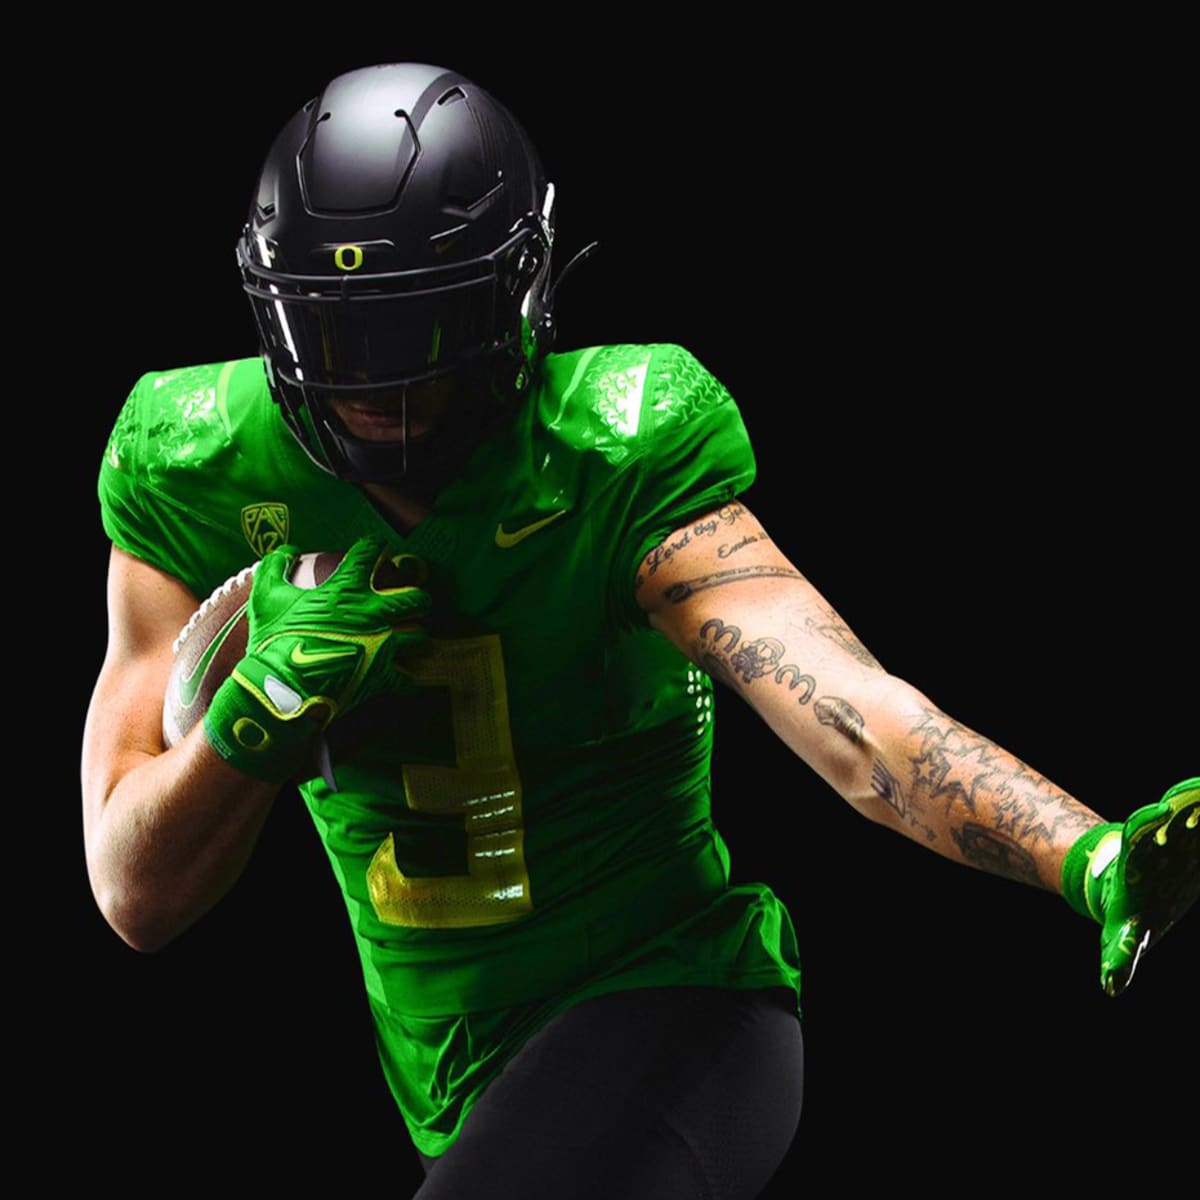 How Long Can Oregon Change Their Uniforms?